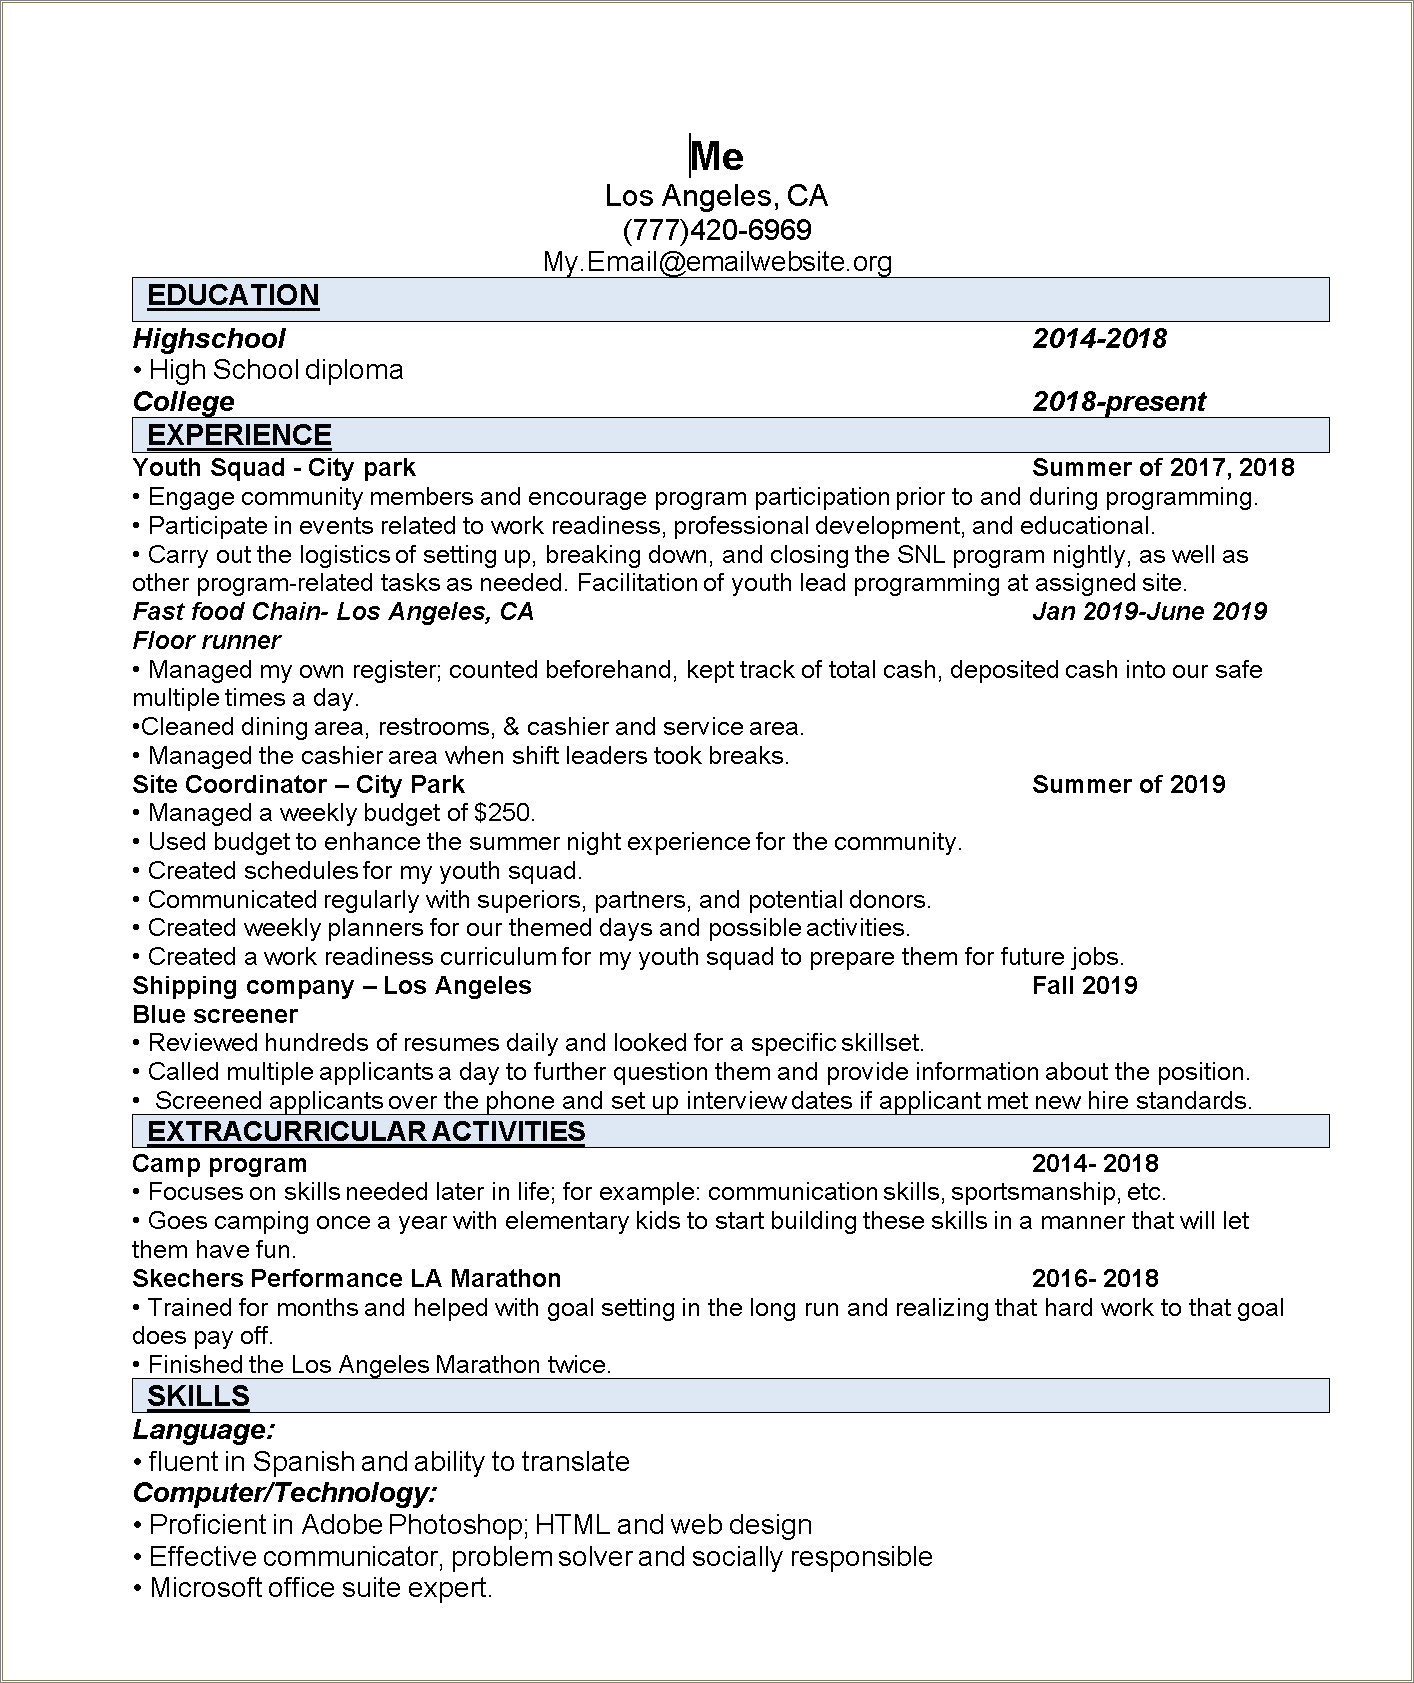 Resume All My Experience Older Than 15 Years